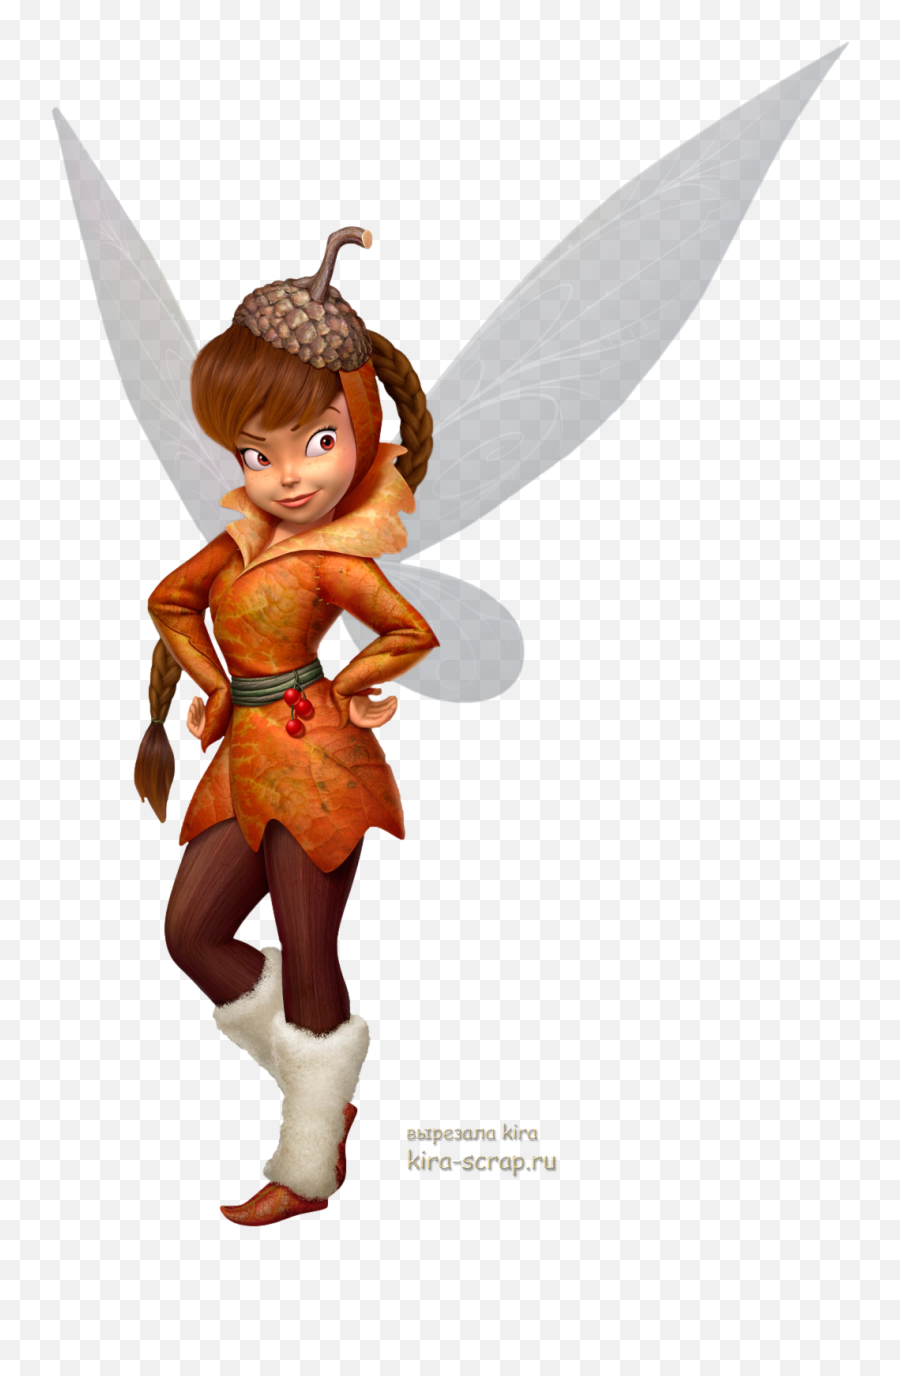 Fawn Tinkerbell Clipart - Full Size Clipart 5537664 Tinker Bell Characters Png Emoji,Tinkerbell Clipart